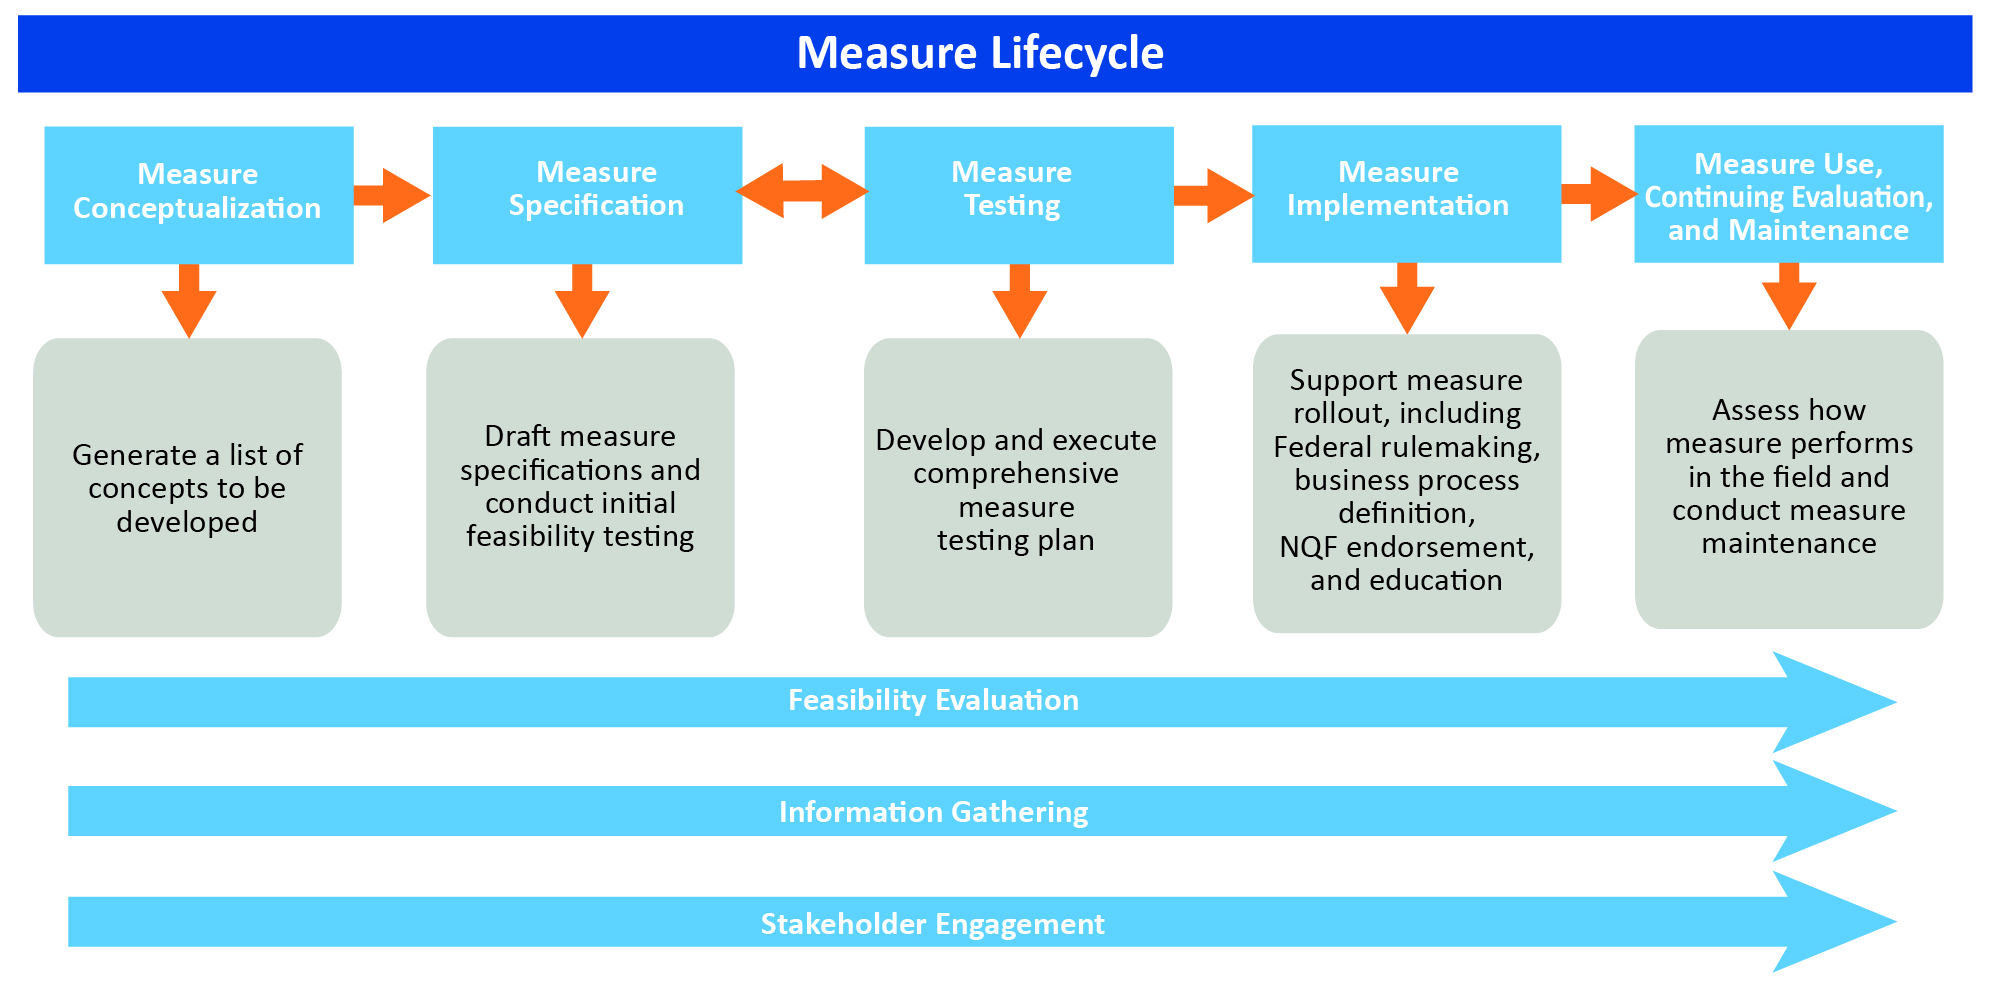 Full measure lifecycle is depicted with feasibility evaluation, information gathering, and stakeholder engagement shown as crossing all stages of development